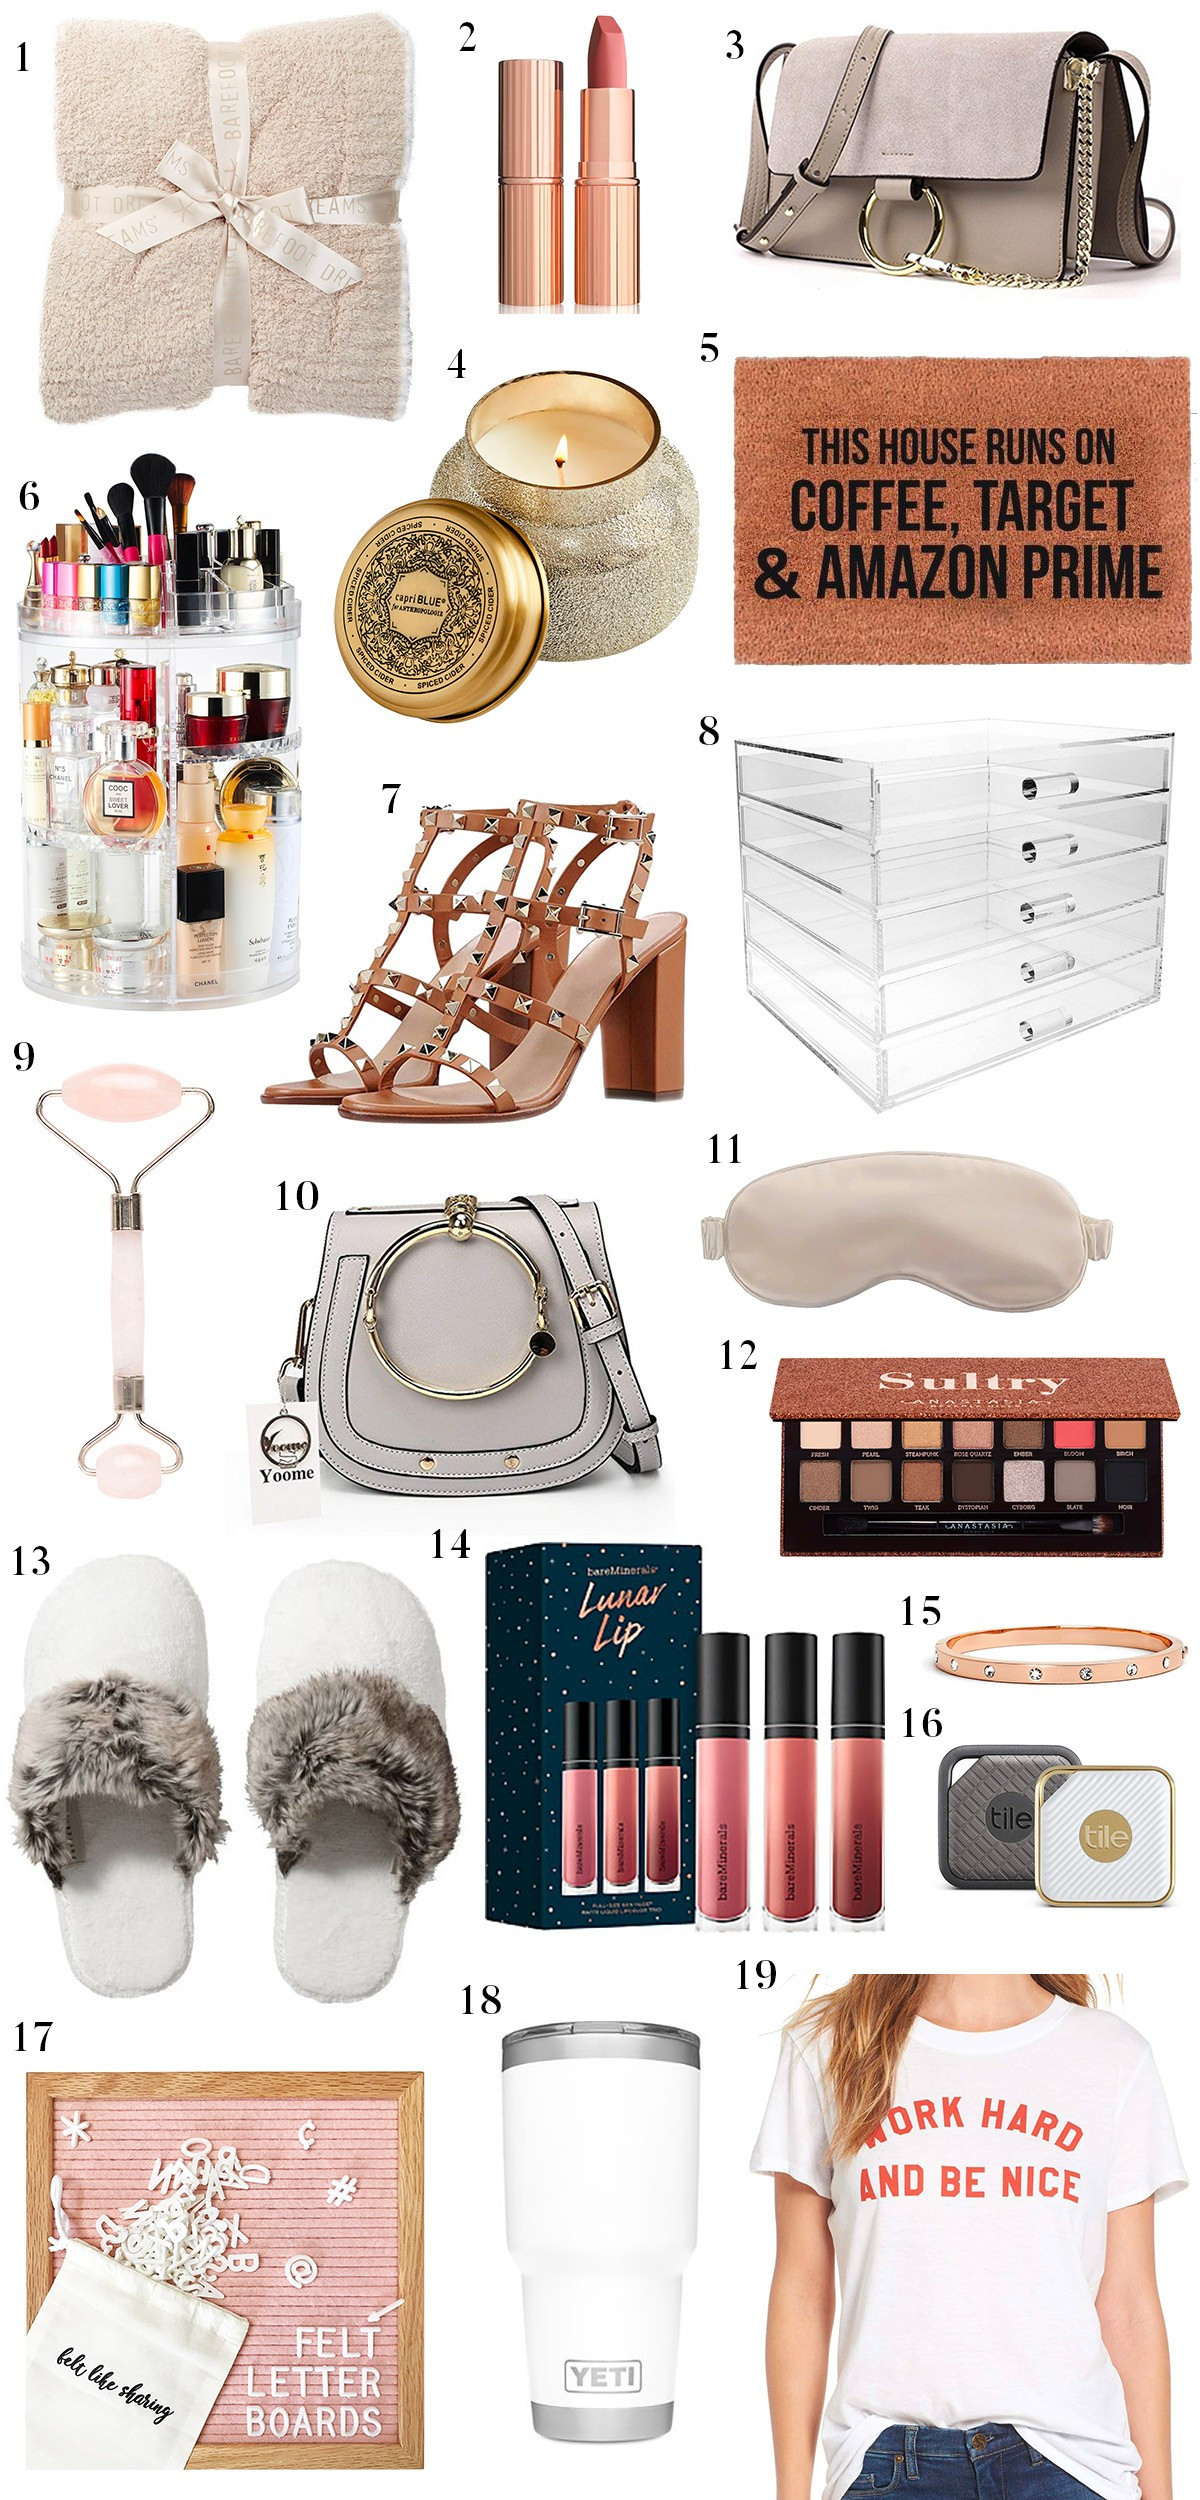 Holiday Gift Ideas For Woman
 Best Gifts for Women Under $50 2018